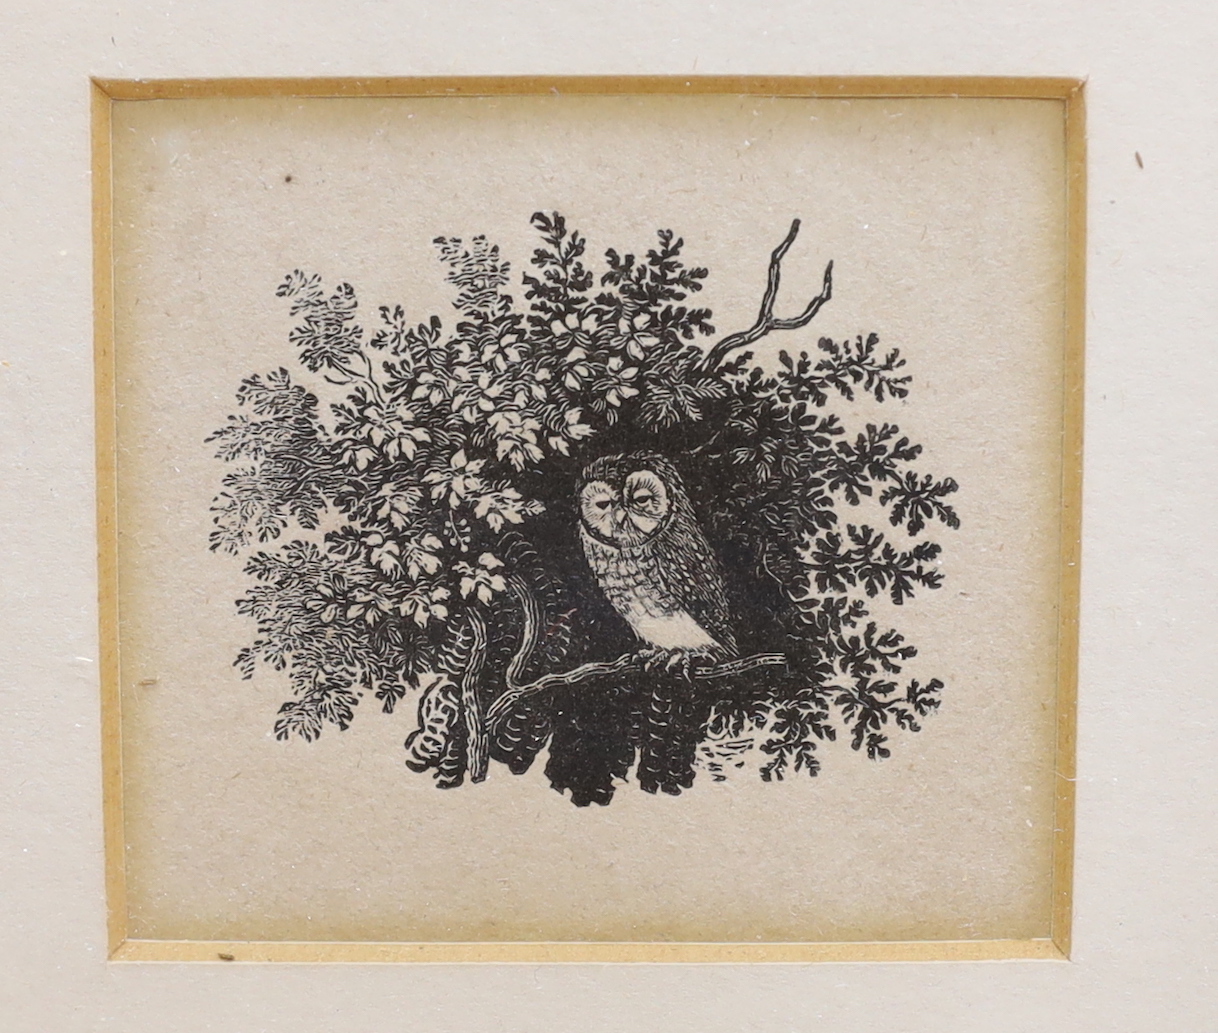 Thomas Bewick (1753-1828) two wood cuts/engravings together with a pencil sketch of a mother and child, inscribed William Frost verso, largest 10 x 7cm